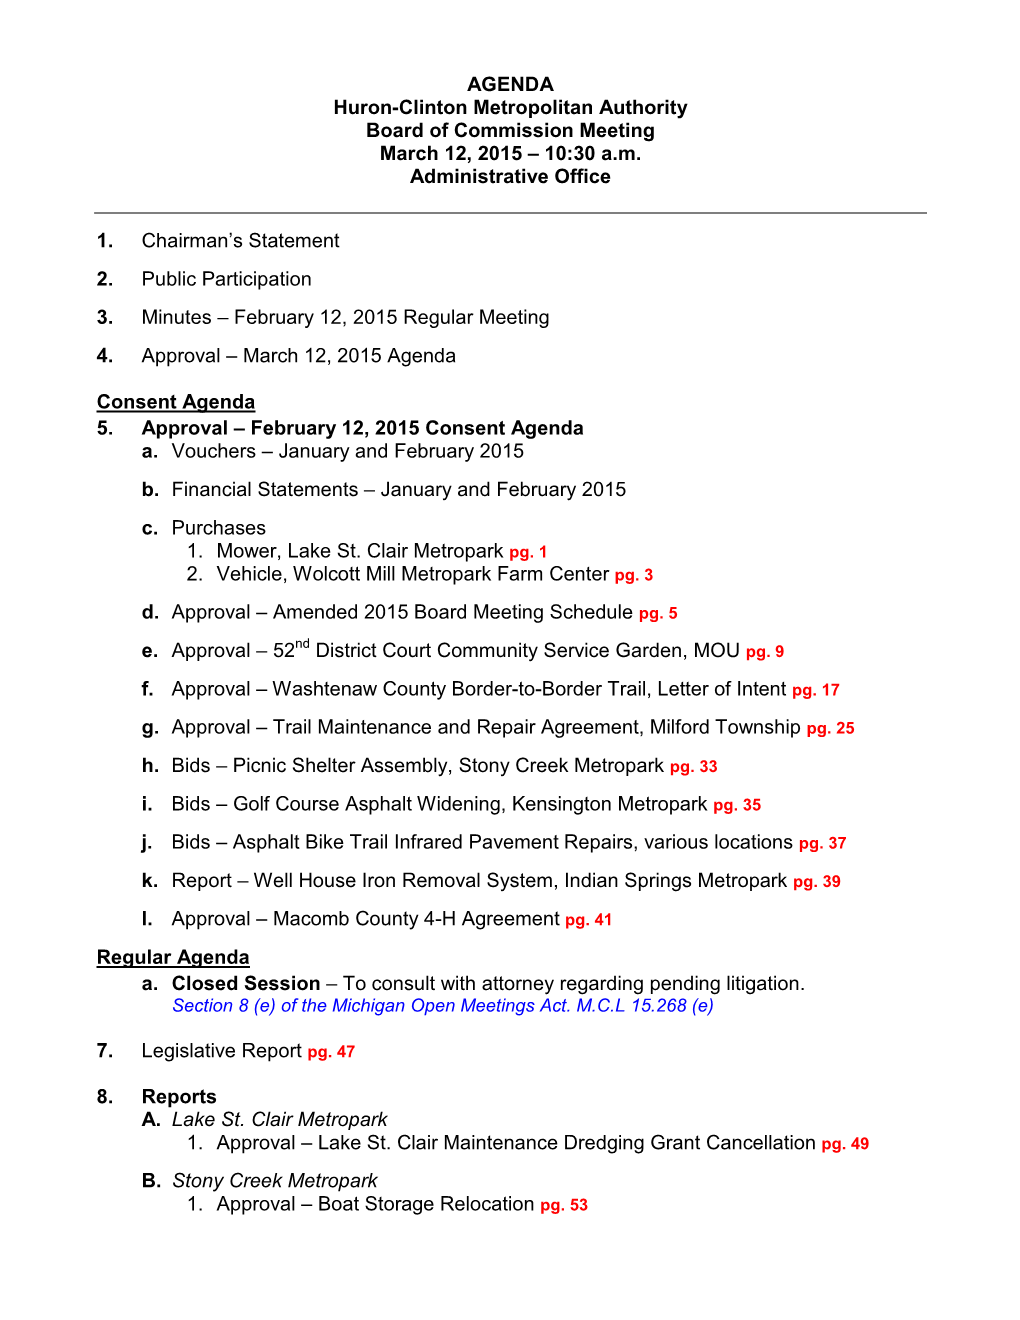 AGENDA Huron-Clinton Metropolitan Authority Board of Commission Meeting March 12, 2015 – 10:30 A.M